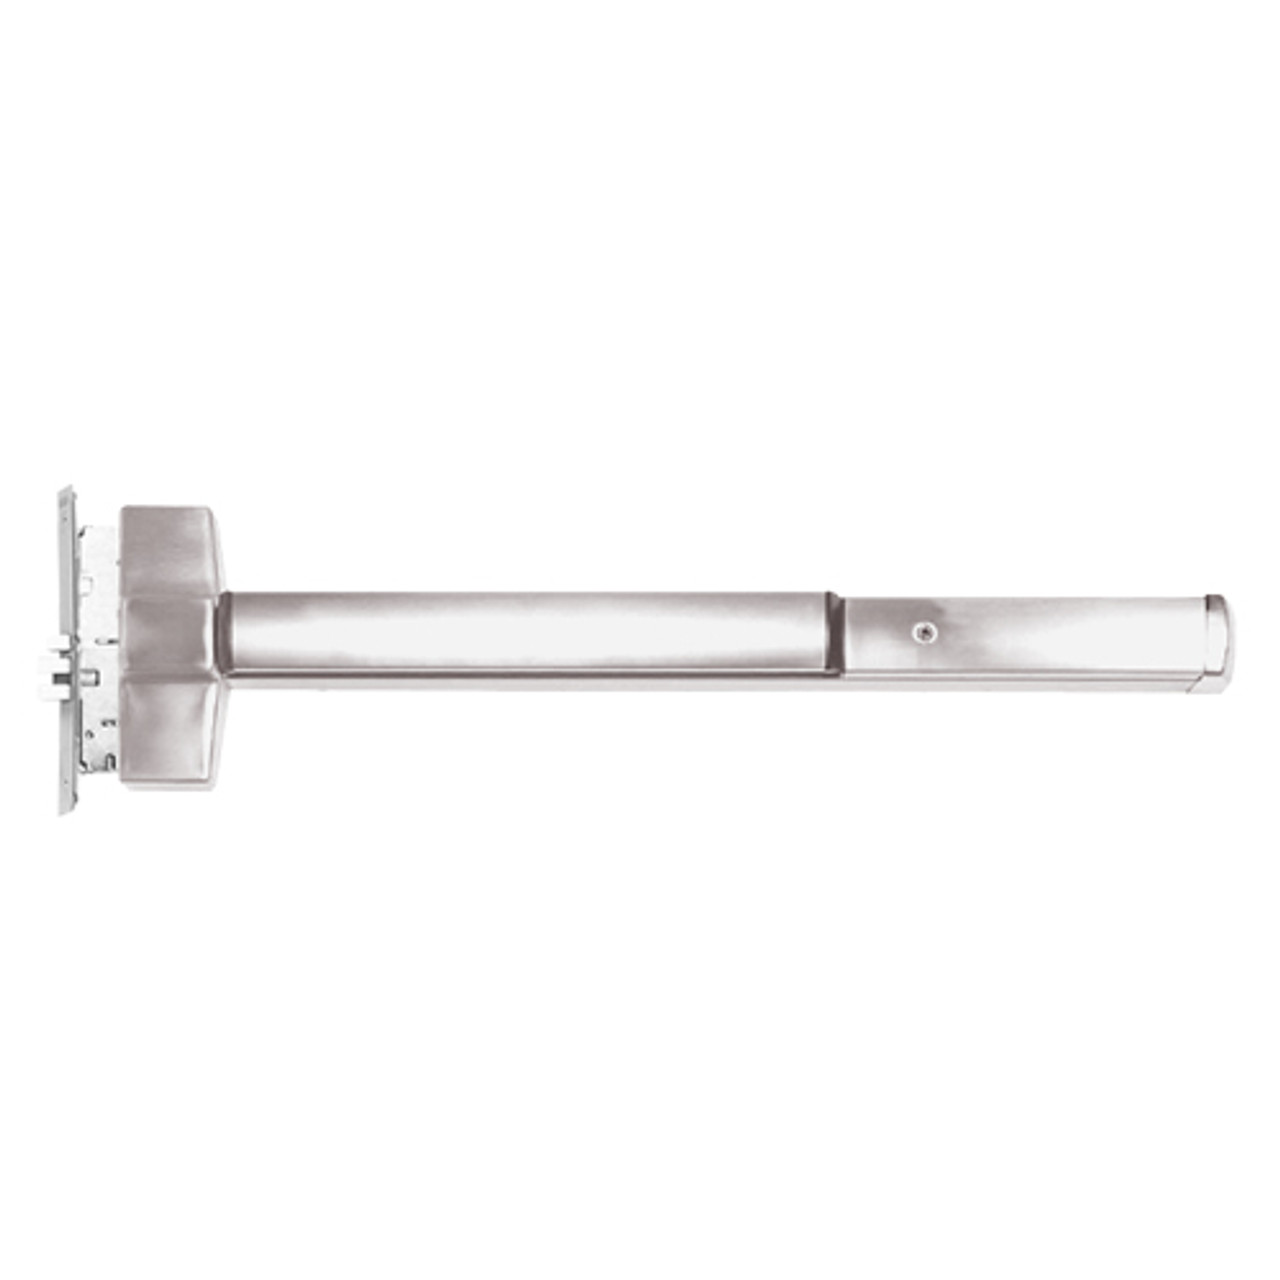 ED5600L-630-W048-LHR Corbin ED5600 Series Non Fire Rated Mortise Exit Device in Satin Stainless Steel Finish